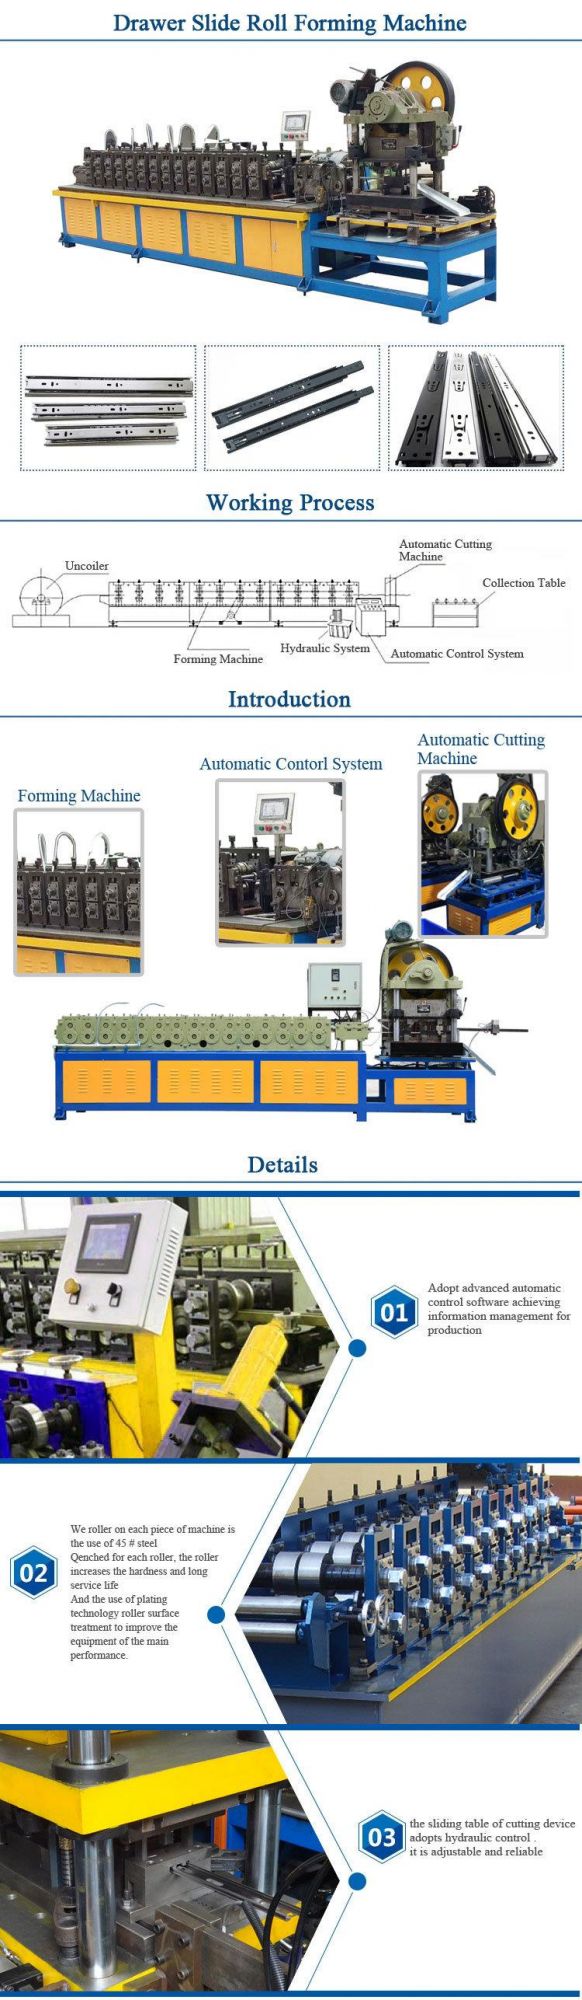 Full Automatic Steel Frame PUR Drawer Slides Rail Roll Forming Machine